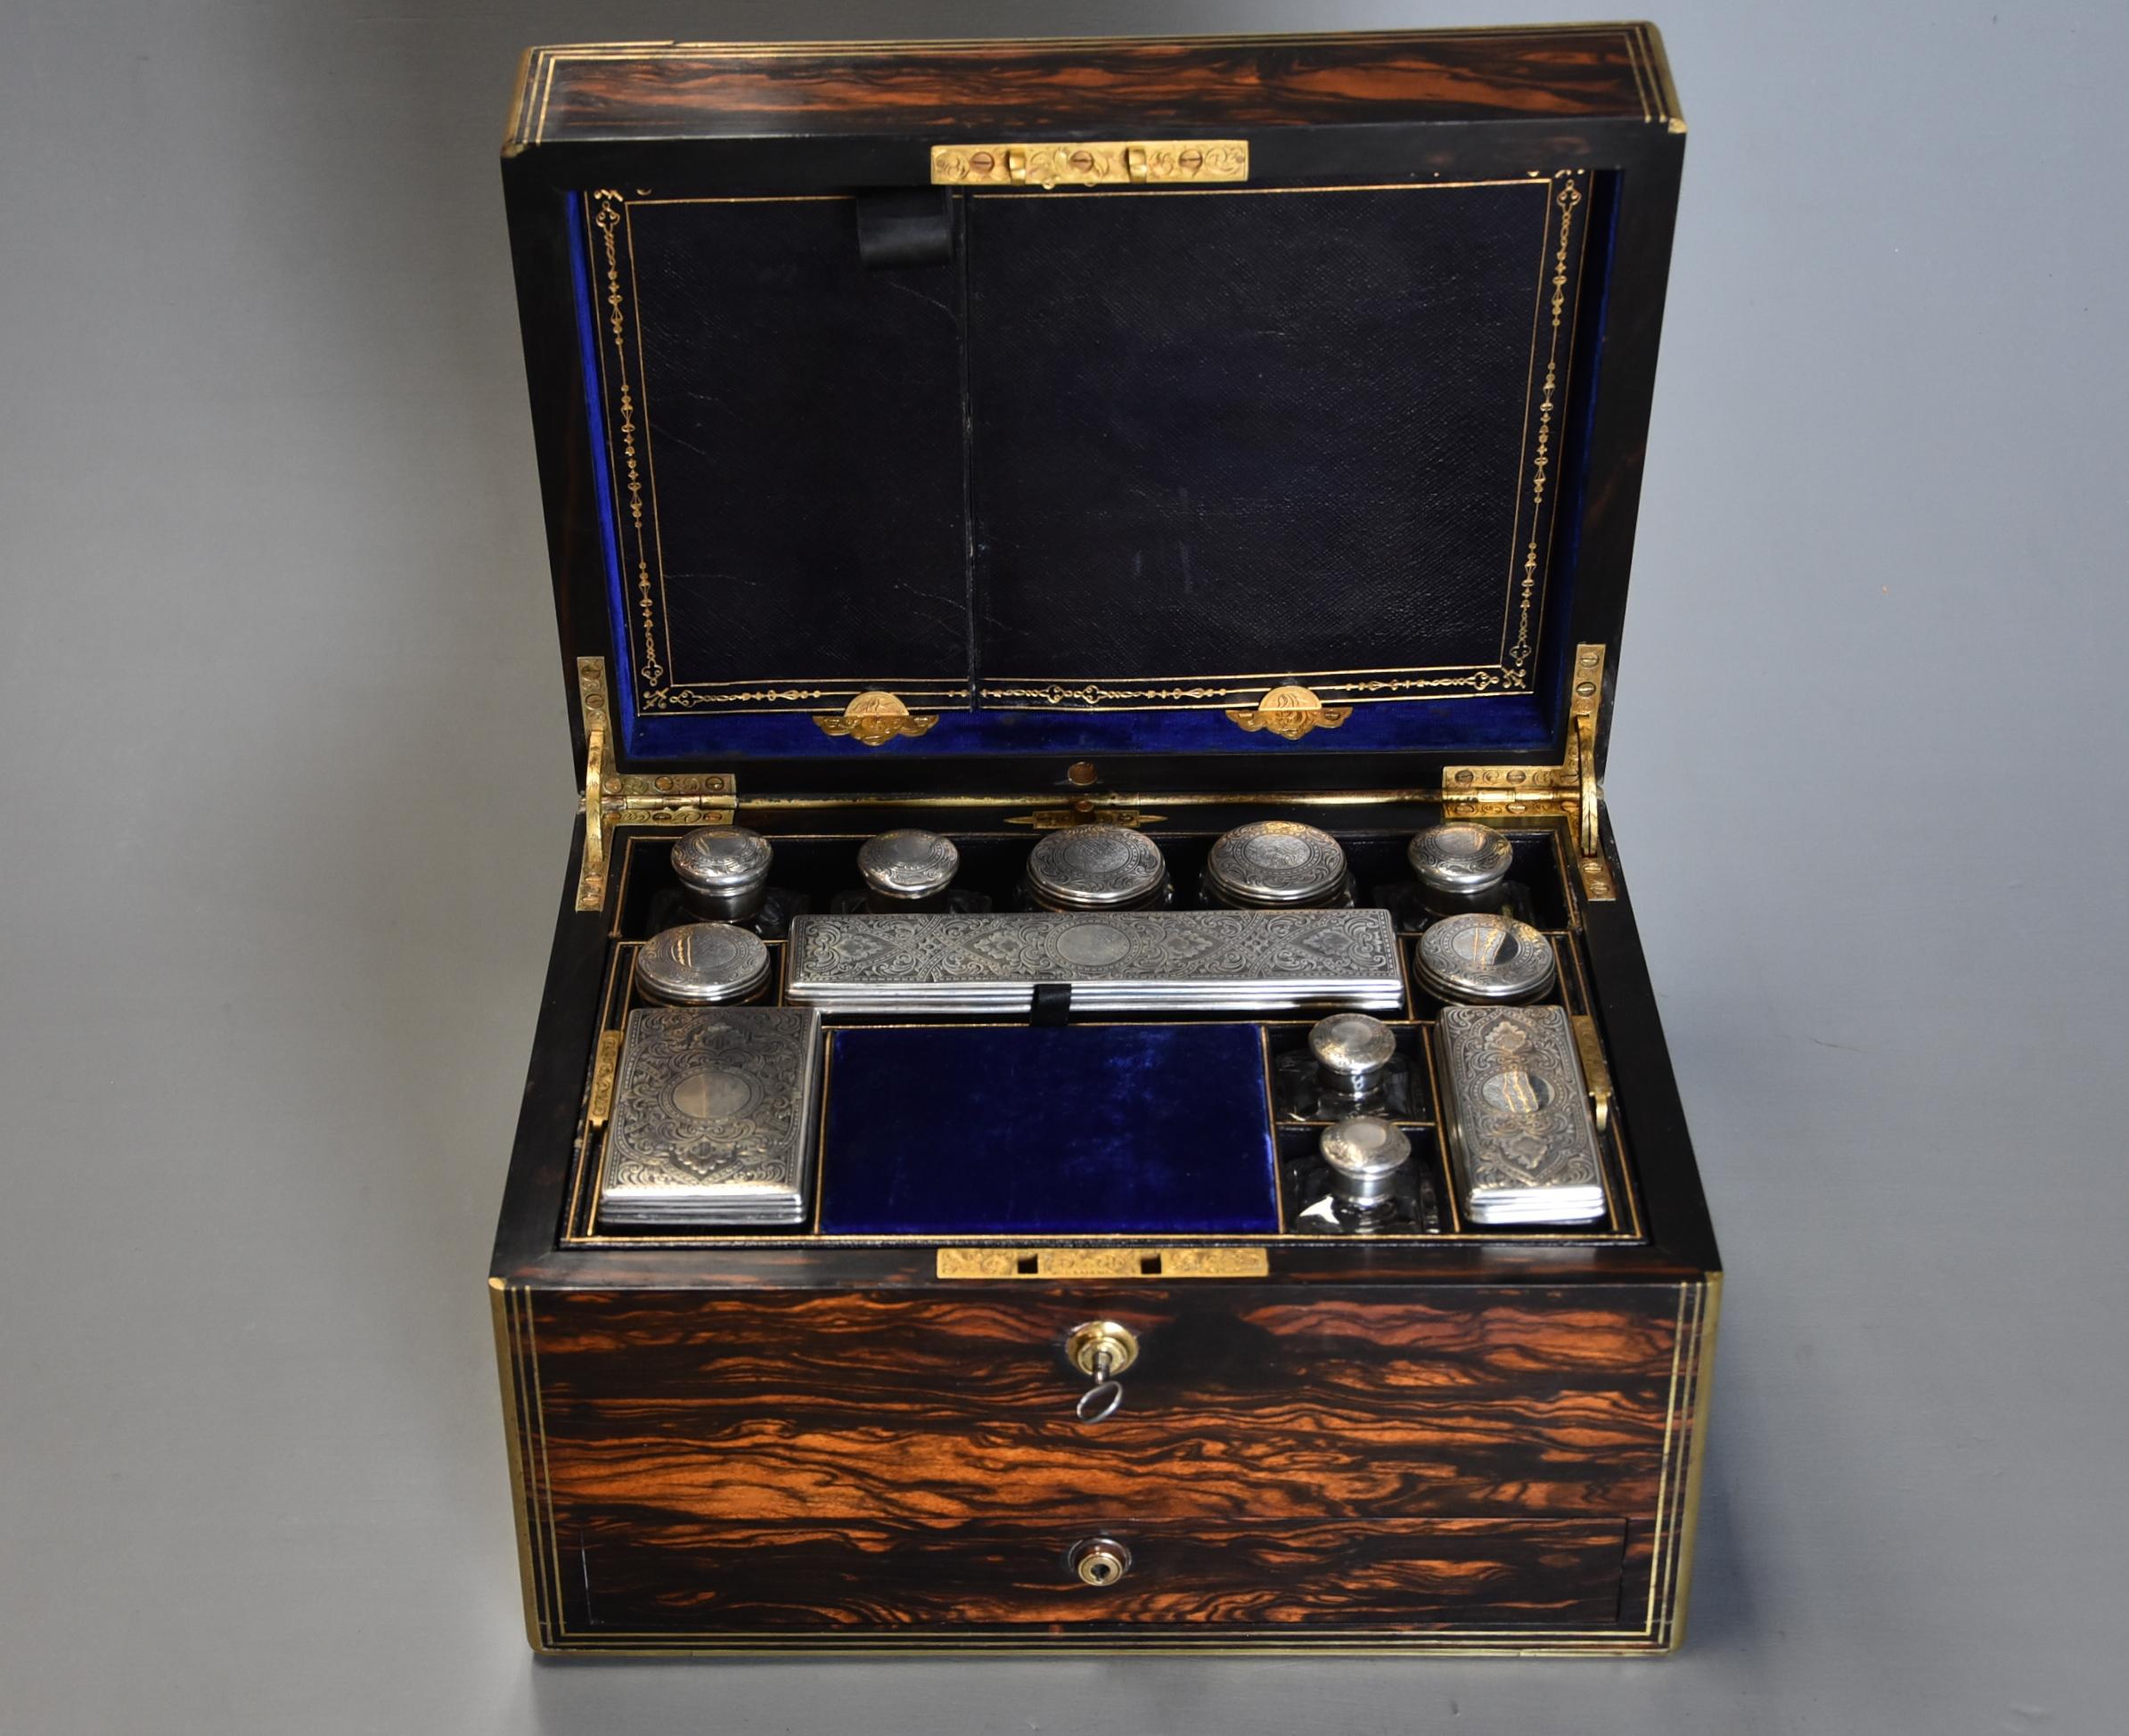 A superb quality late 19th century Coromandel and brass bound travelling vanity box.

The box consists of a beautiful Coromandel wood case with polished brass edge and brass stringing with chased brass cartouche.

The box opens to reveal